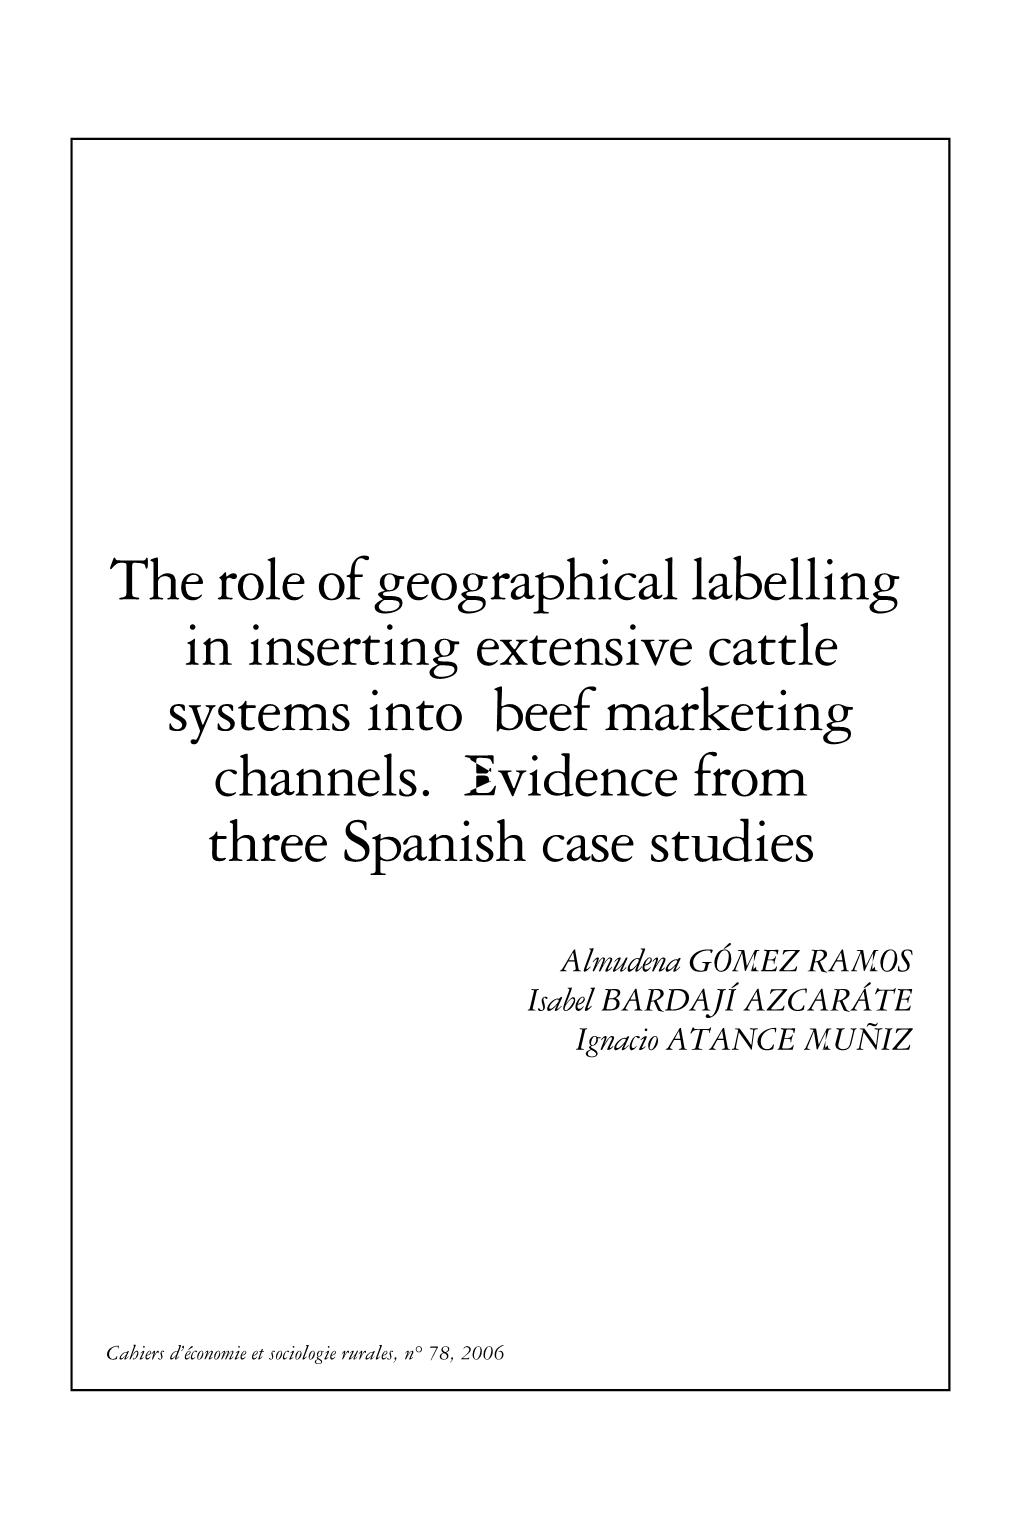 The Role of Geographicallabelling in Inserting Extensive Cattle Systems Into Beef Marketing Channels. Evidence from Three Spanis